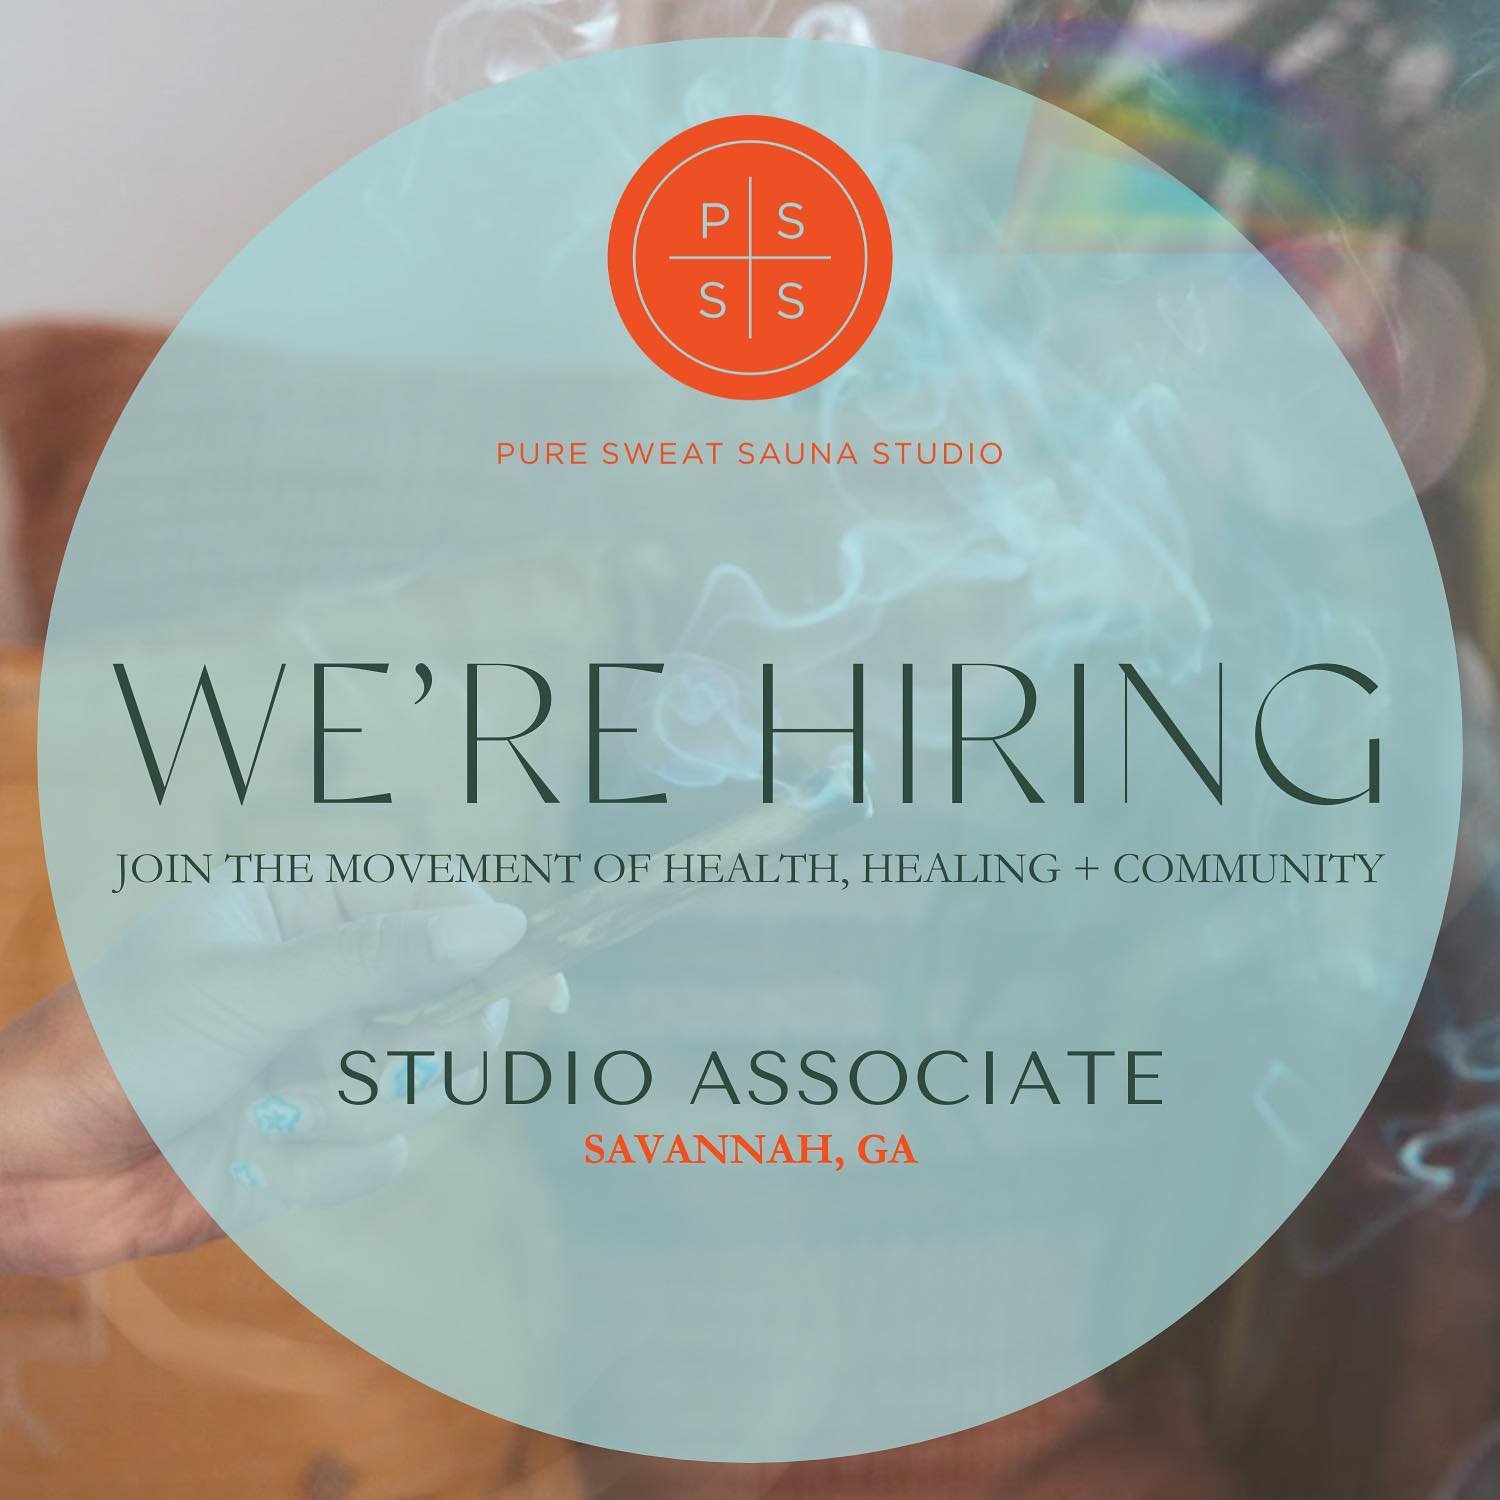 ✨WE ARE HIRING✨
Part Time Positions Available

Are you outgoing + a people-person?
High energy, have daytime + weekend availability and thrive in a fast paced environment?

Job Description:

&bull; Provide top-notch client service while greeting clie